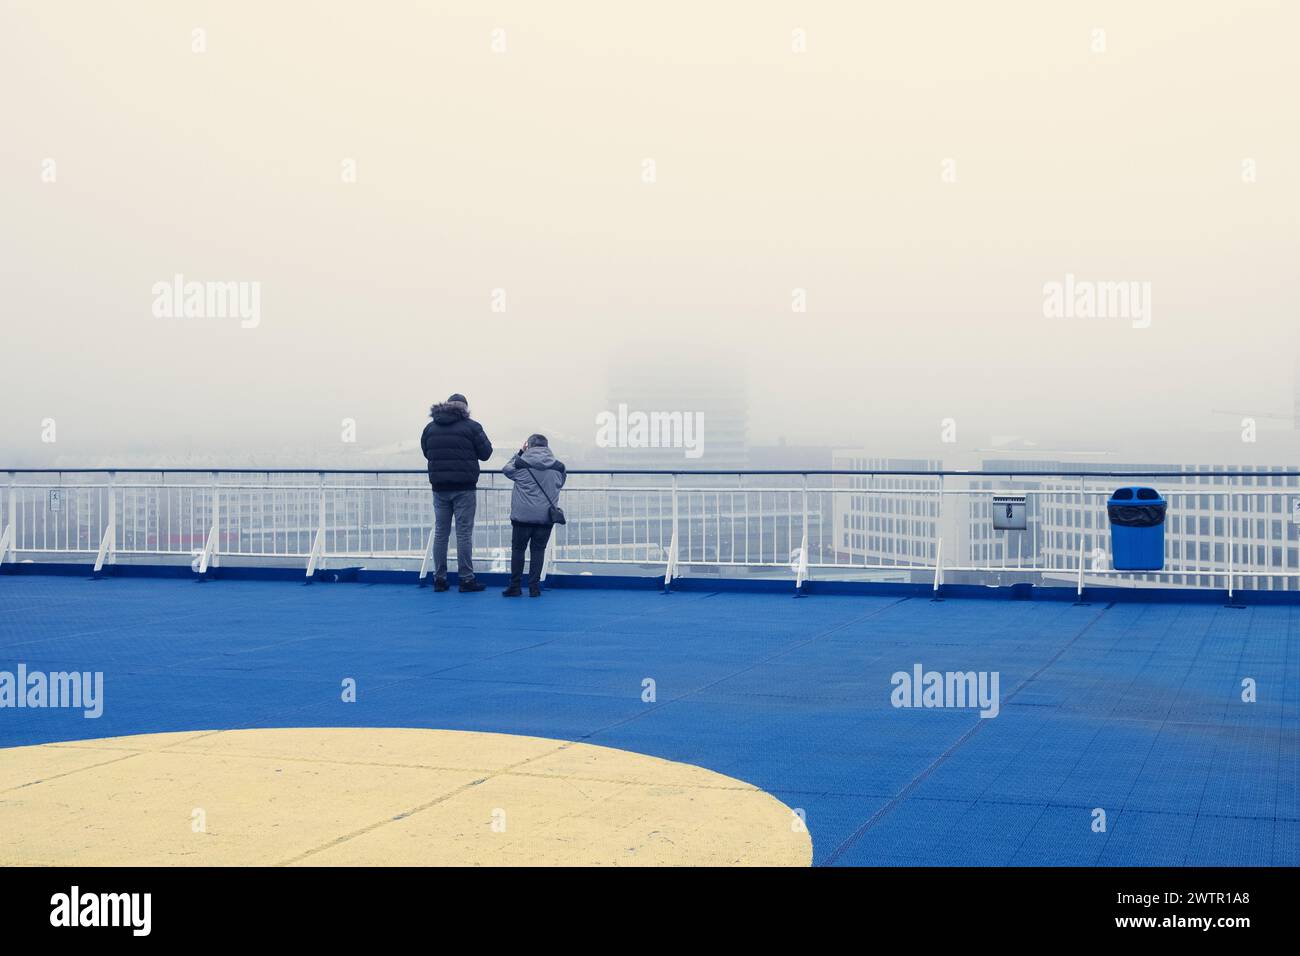 A rear view of passengers on a ferry deck observe mist enveloping the surroundings Stock Photo